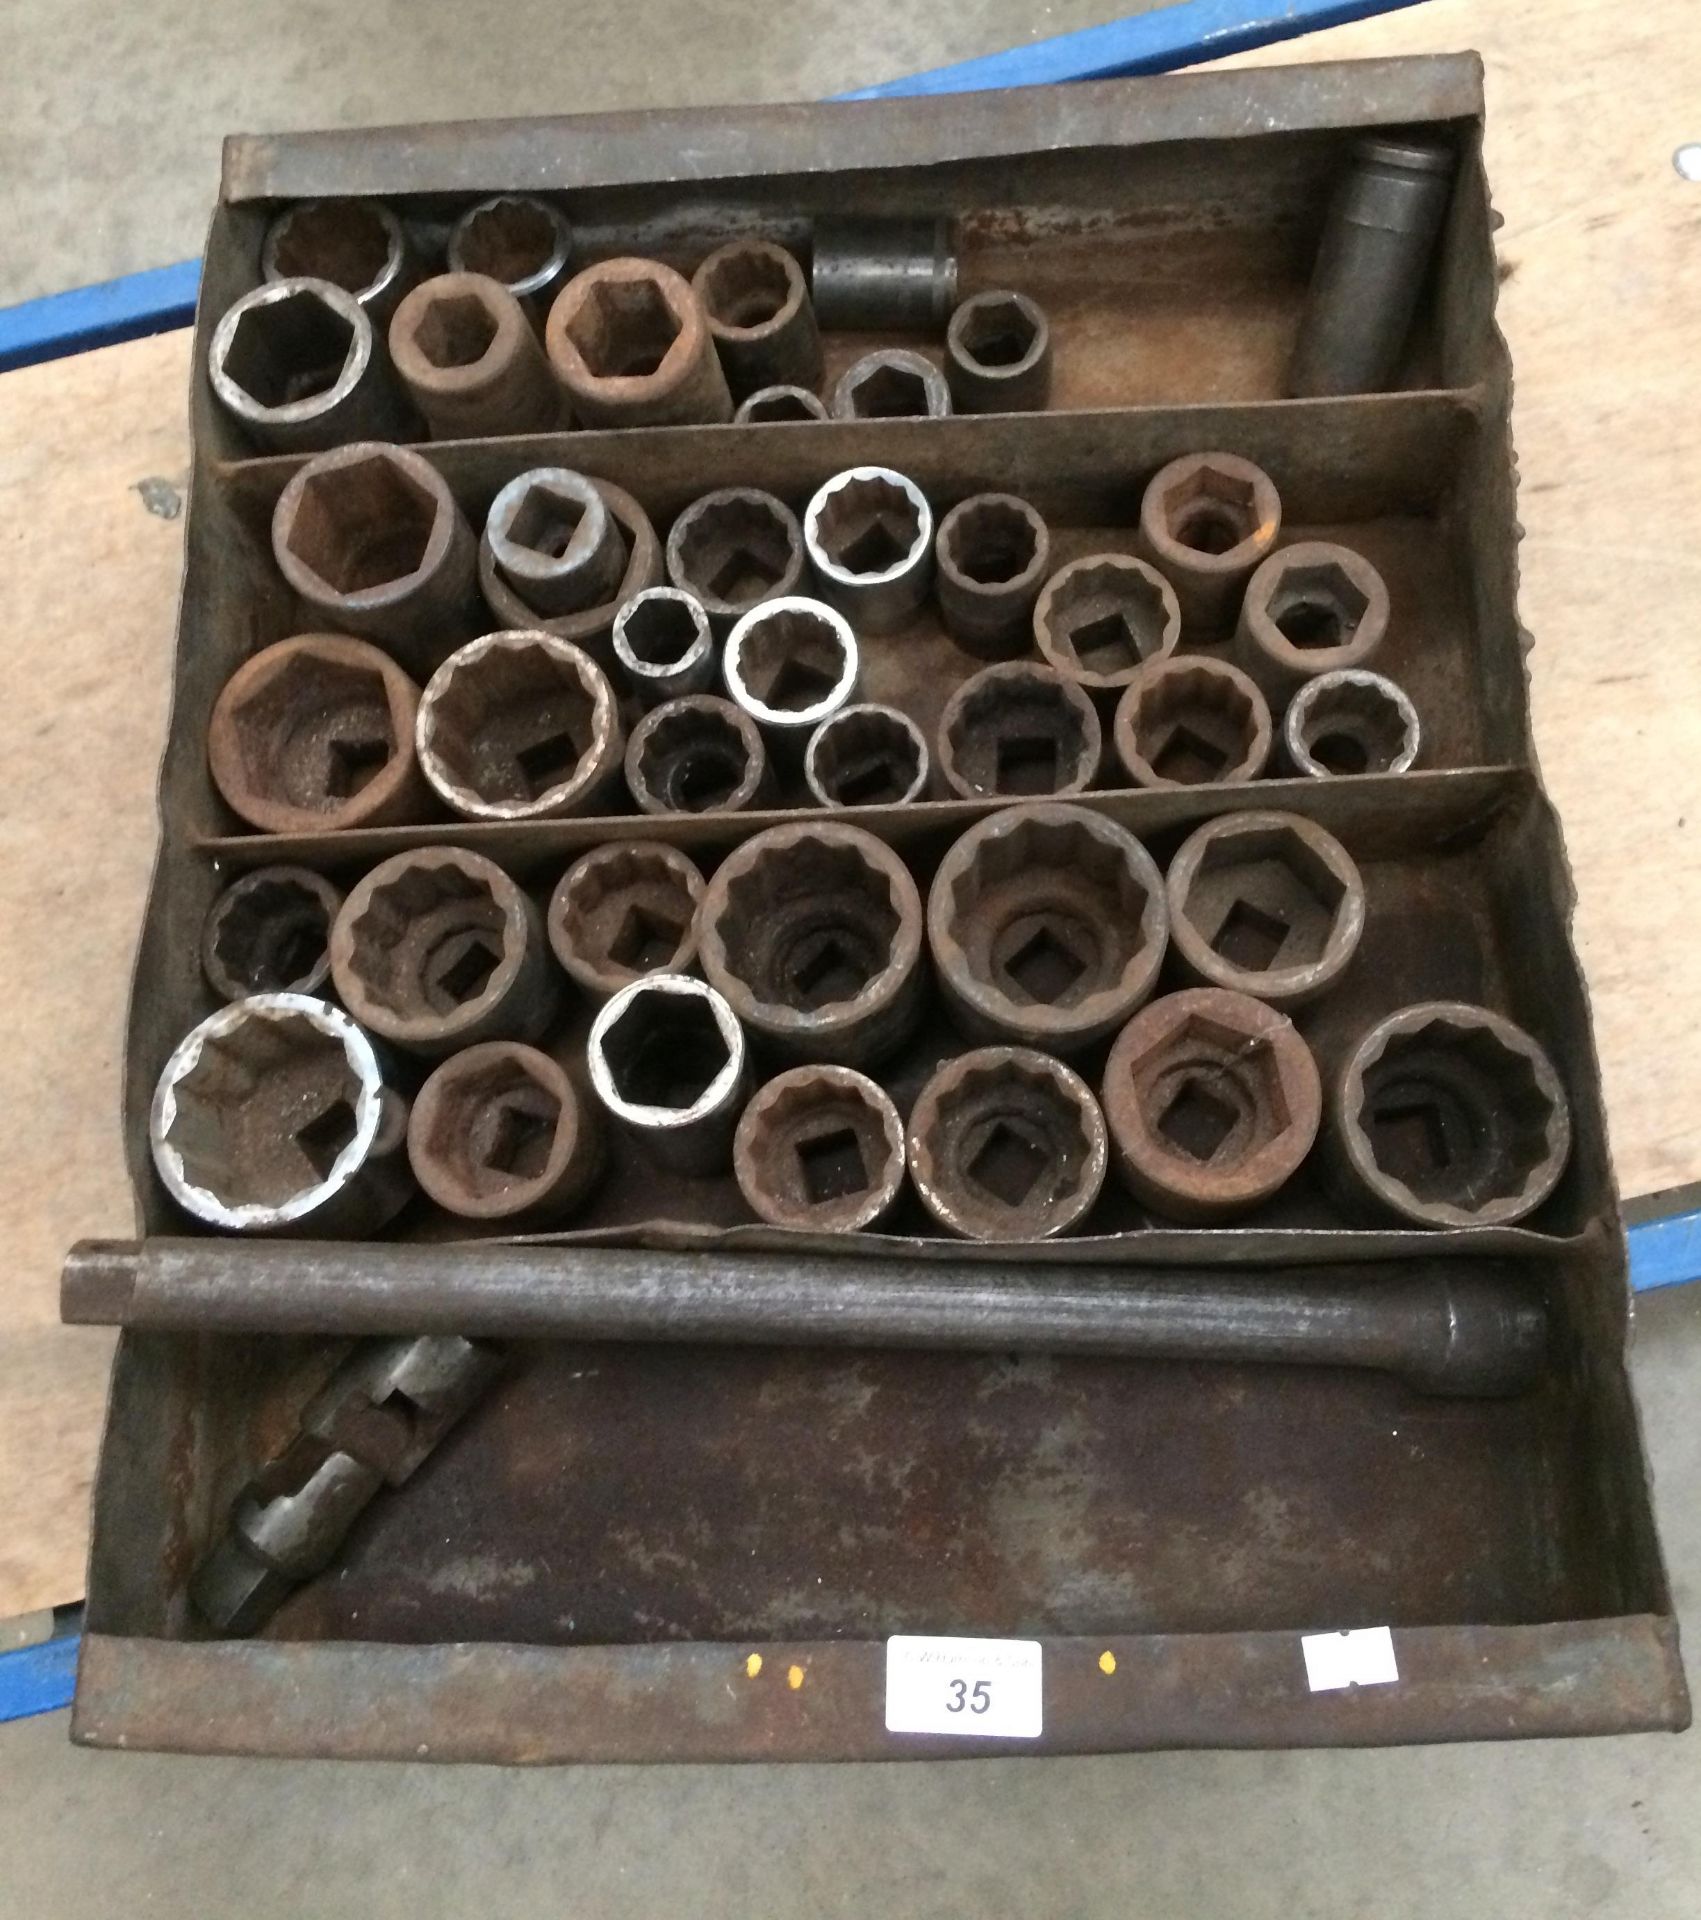 Metal tray containing approximately 42 various sockets